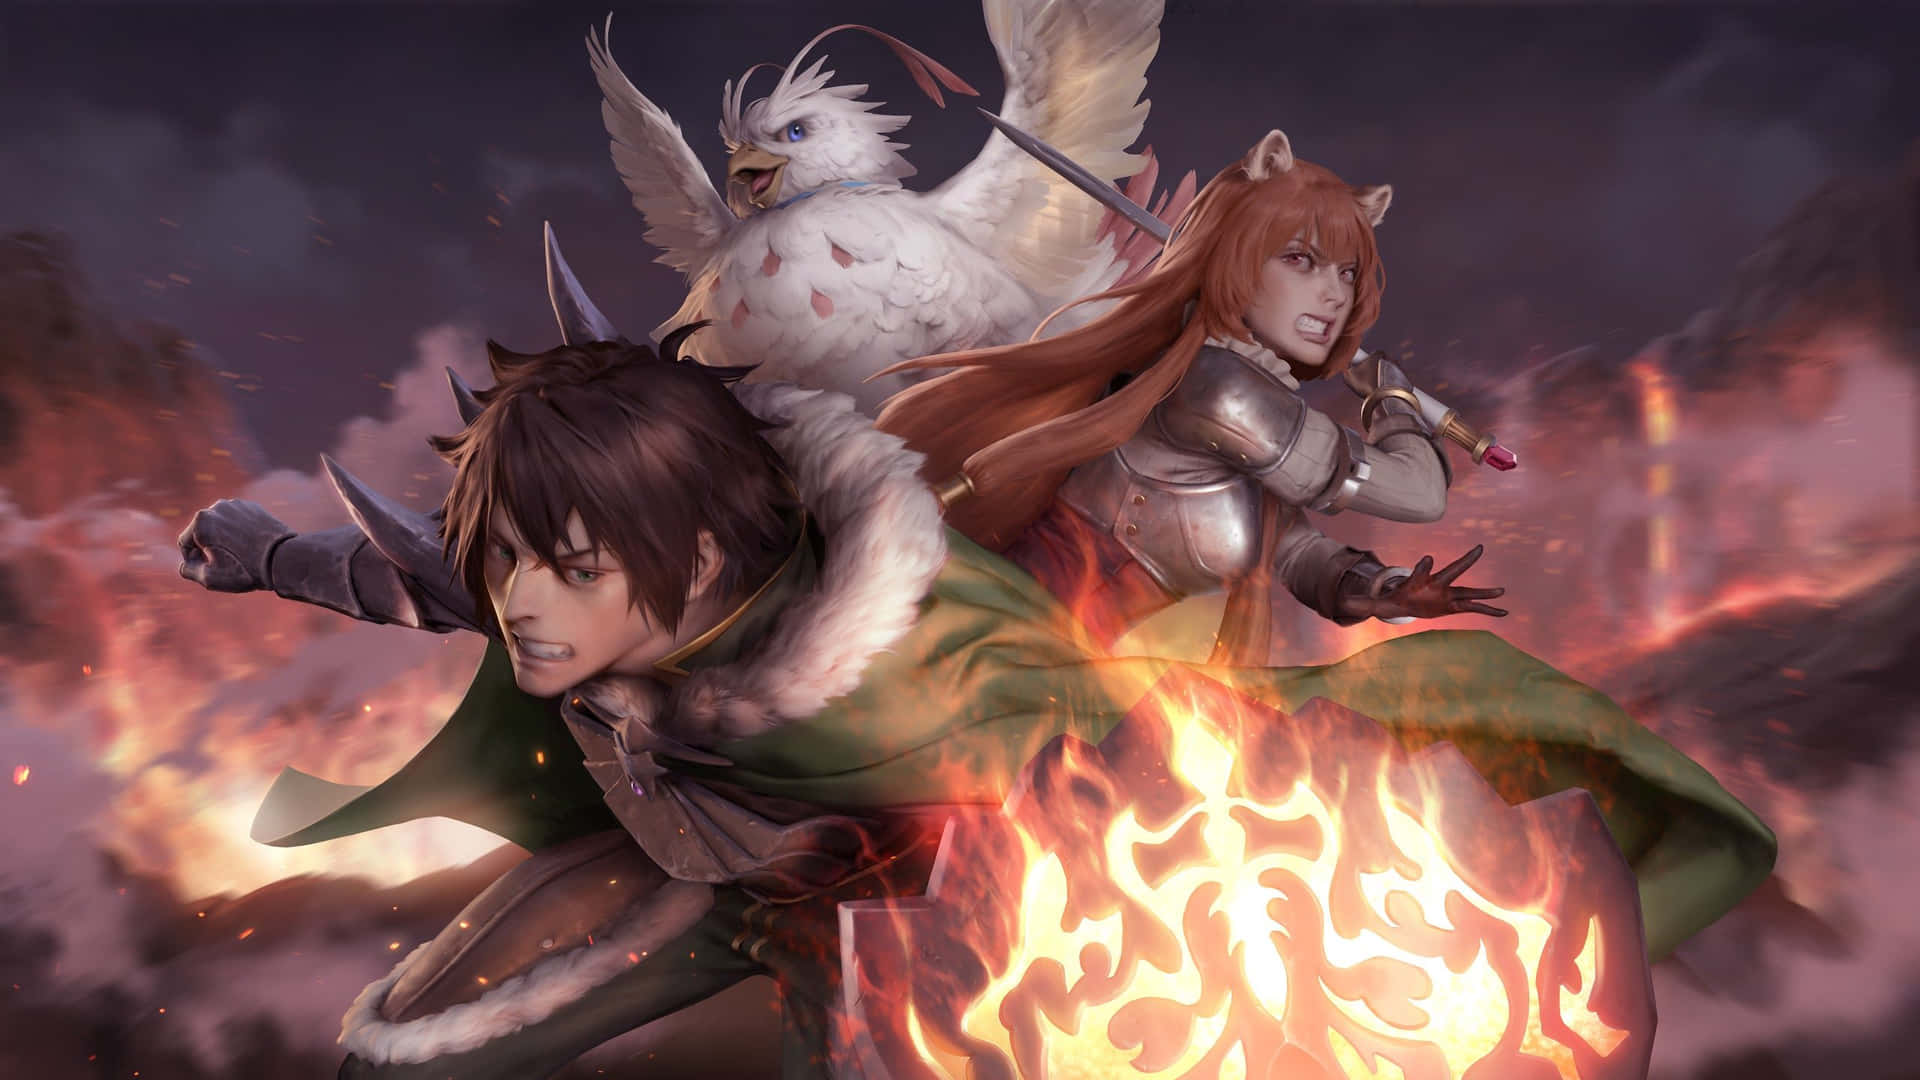 Empower yourself with strength and courage with Shield Hero!